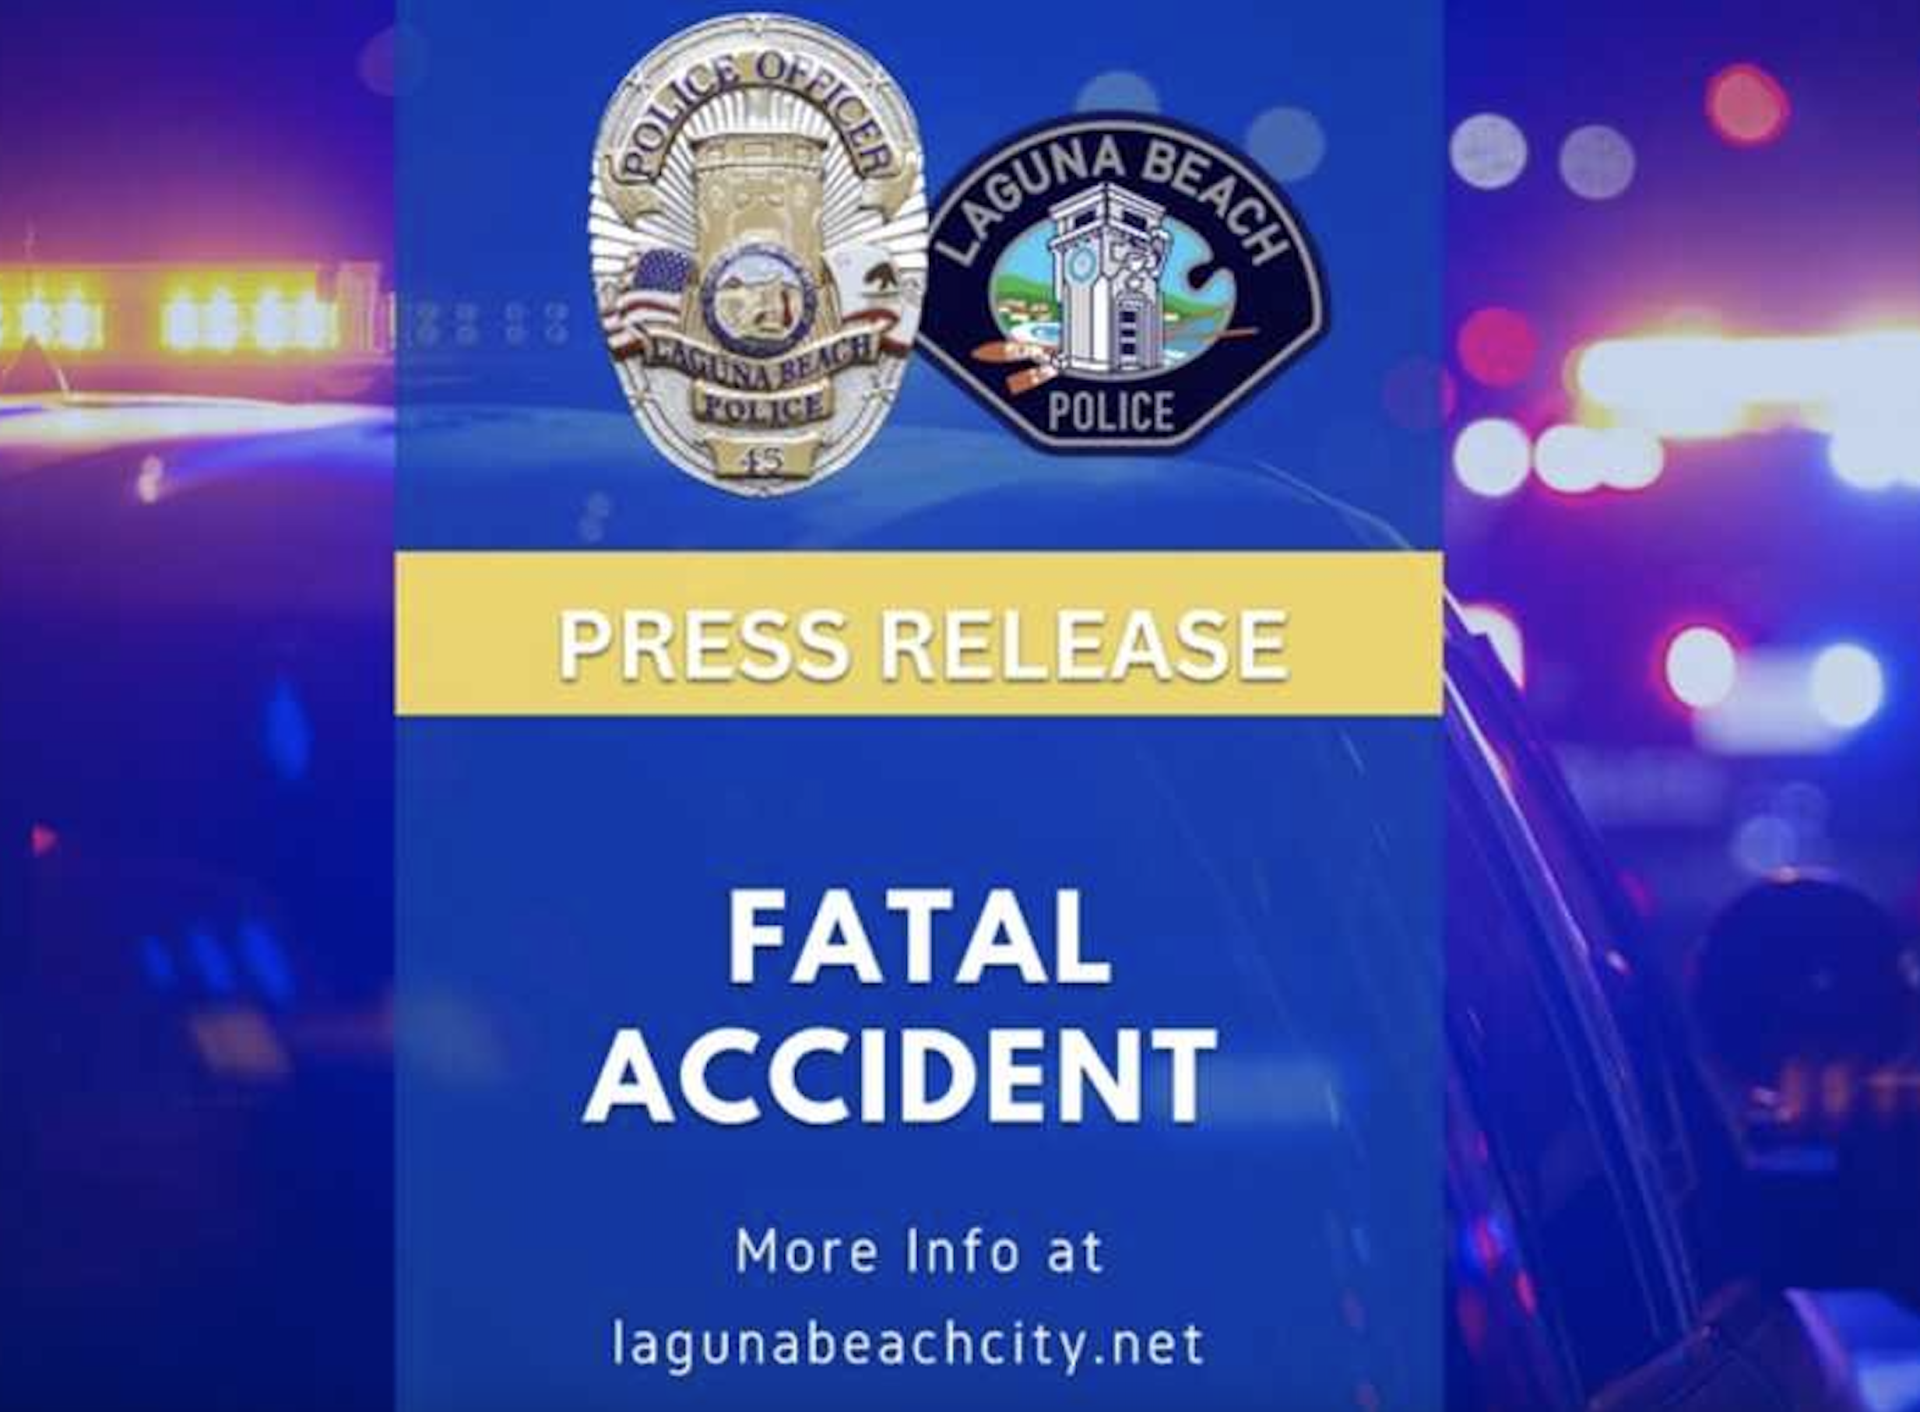 Police - Fatal Accident